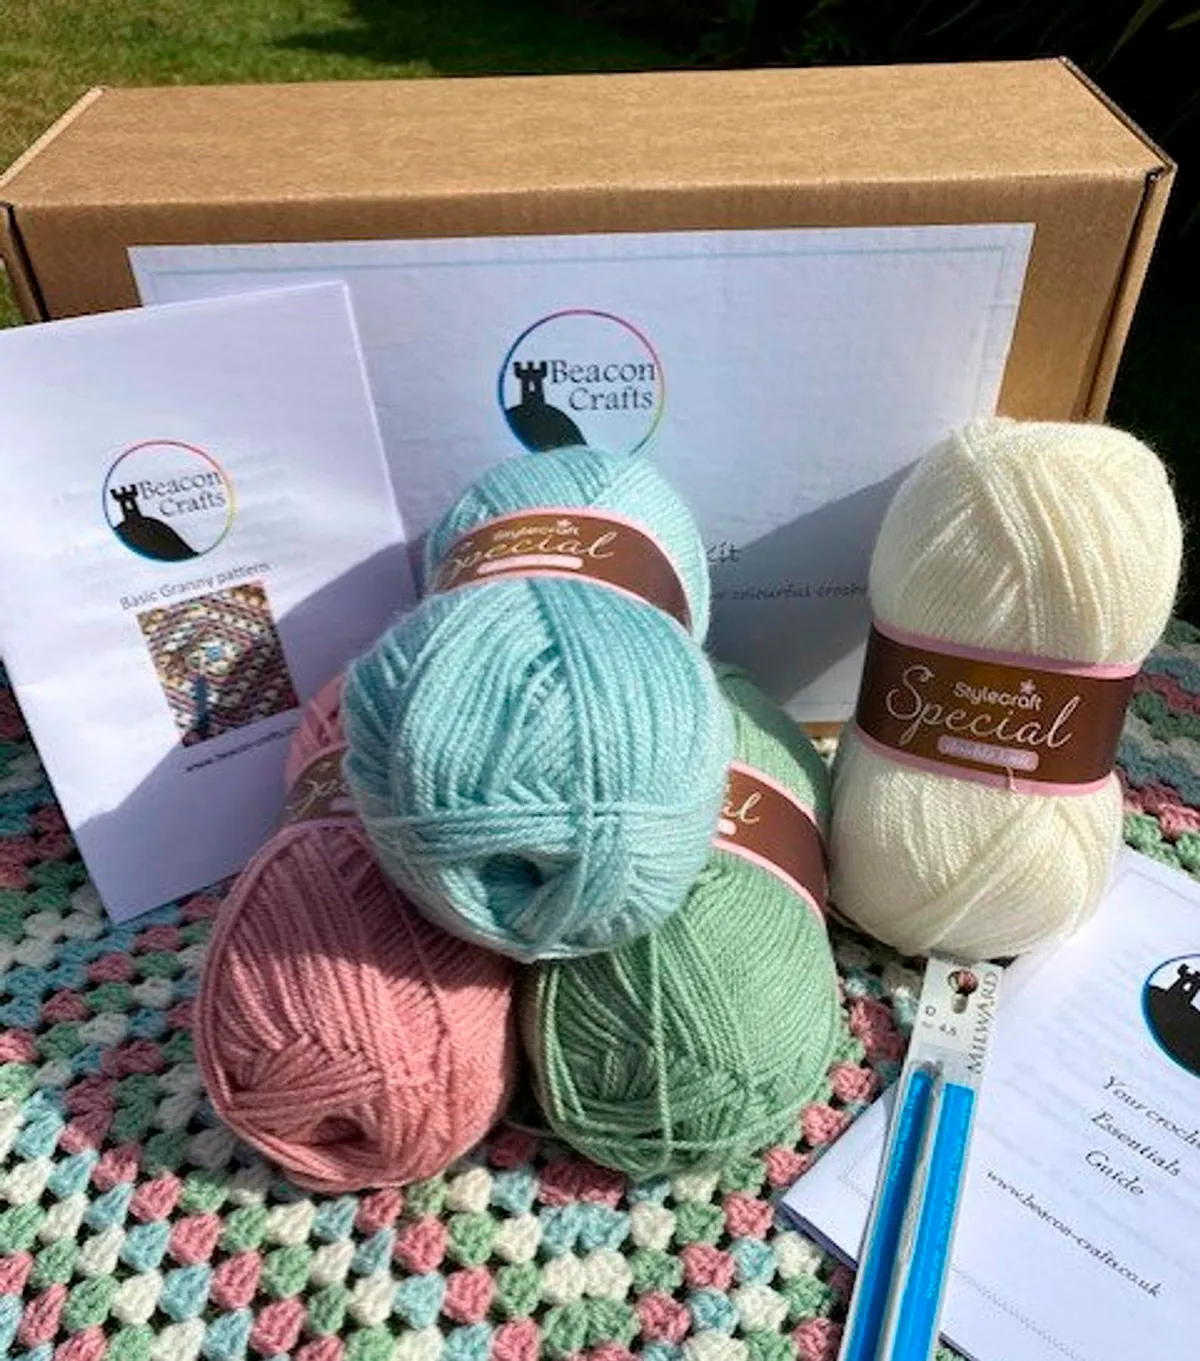 Wholesale crochet kits for Recreation and Hobby 